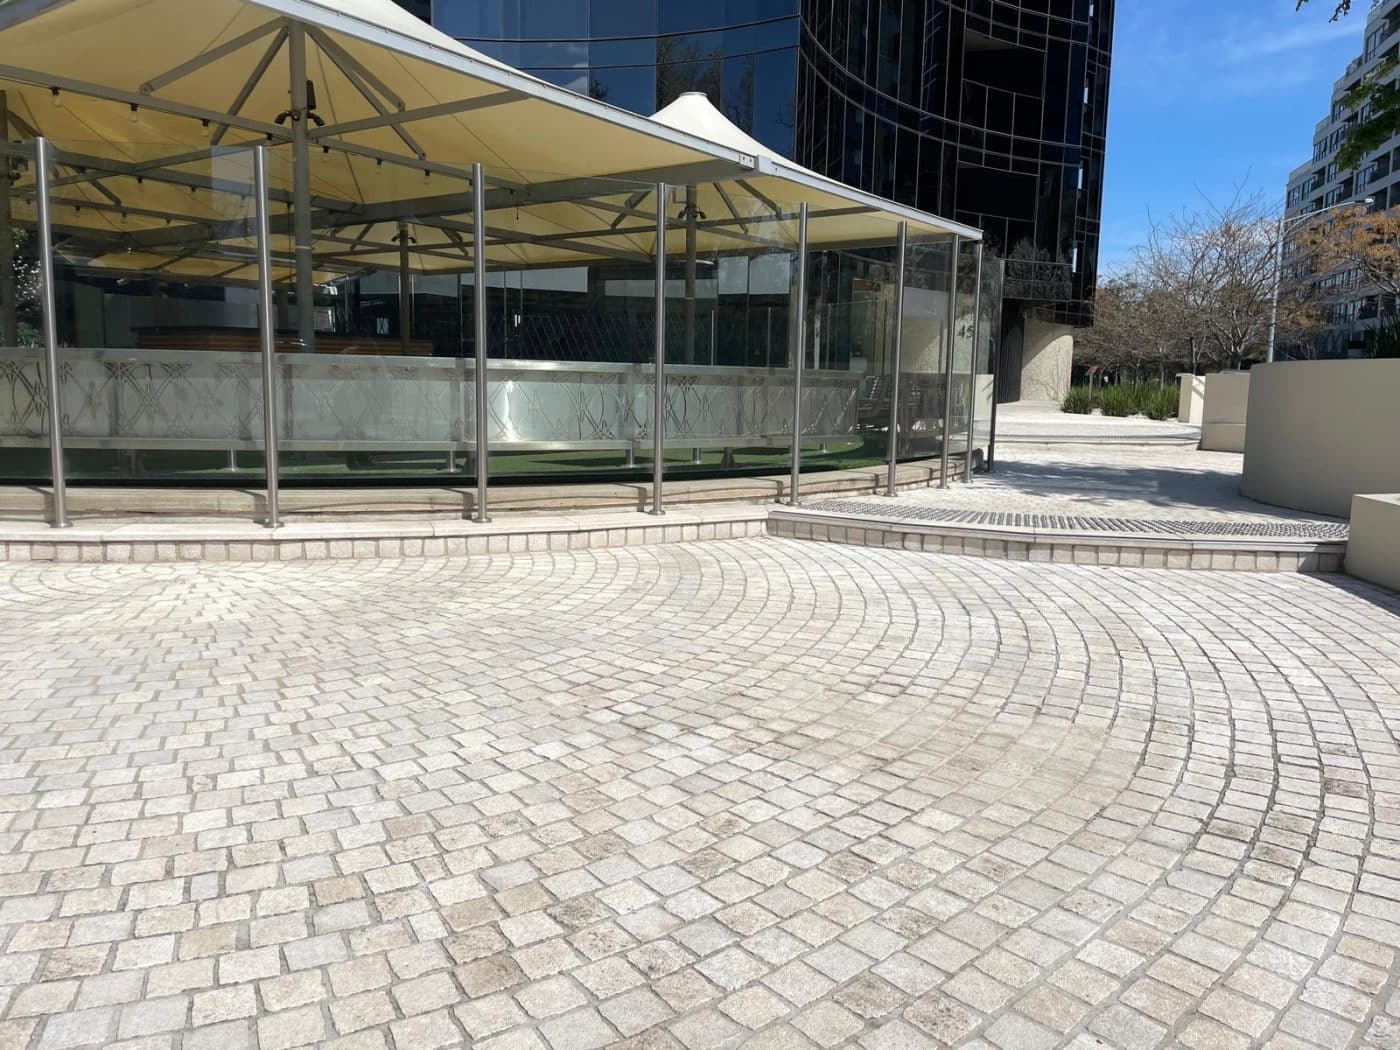 SUNSET-GRANITE-COBBLESTONES_RMS-TRADERS_NATURAL-STONE-DRIVEWAY-FOOTPATHS-EXTERNAL-SUPPLIER-MELBOURNE-5-scaled